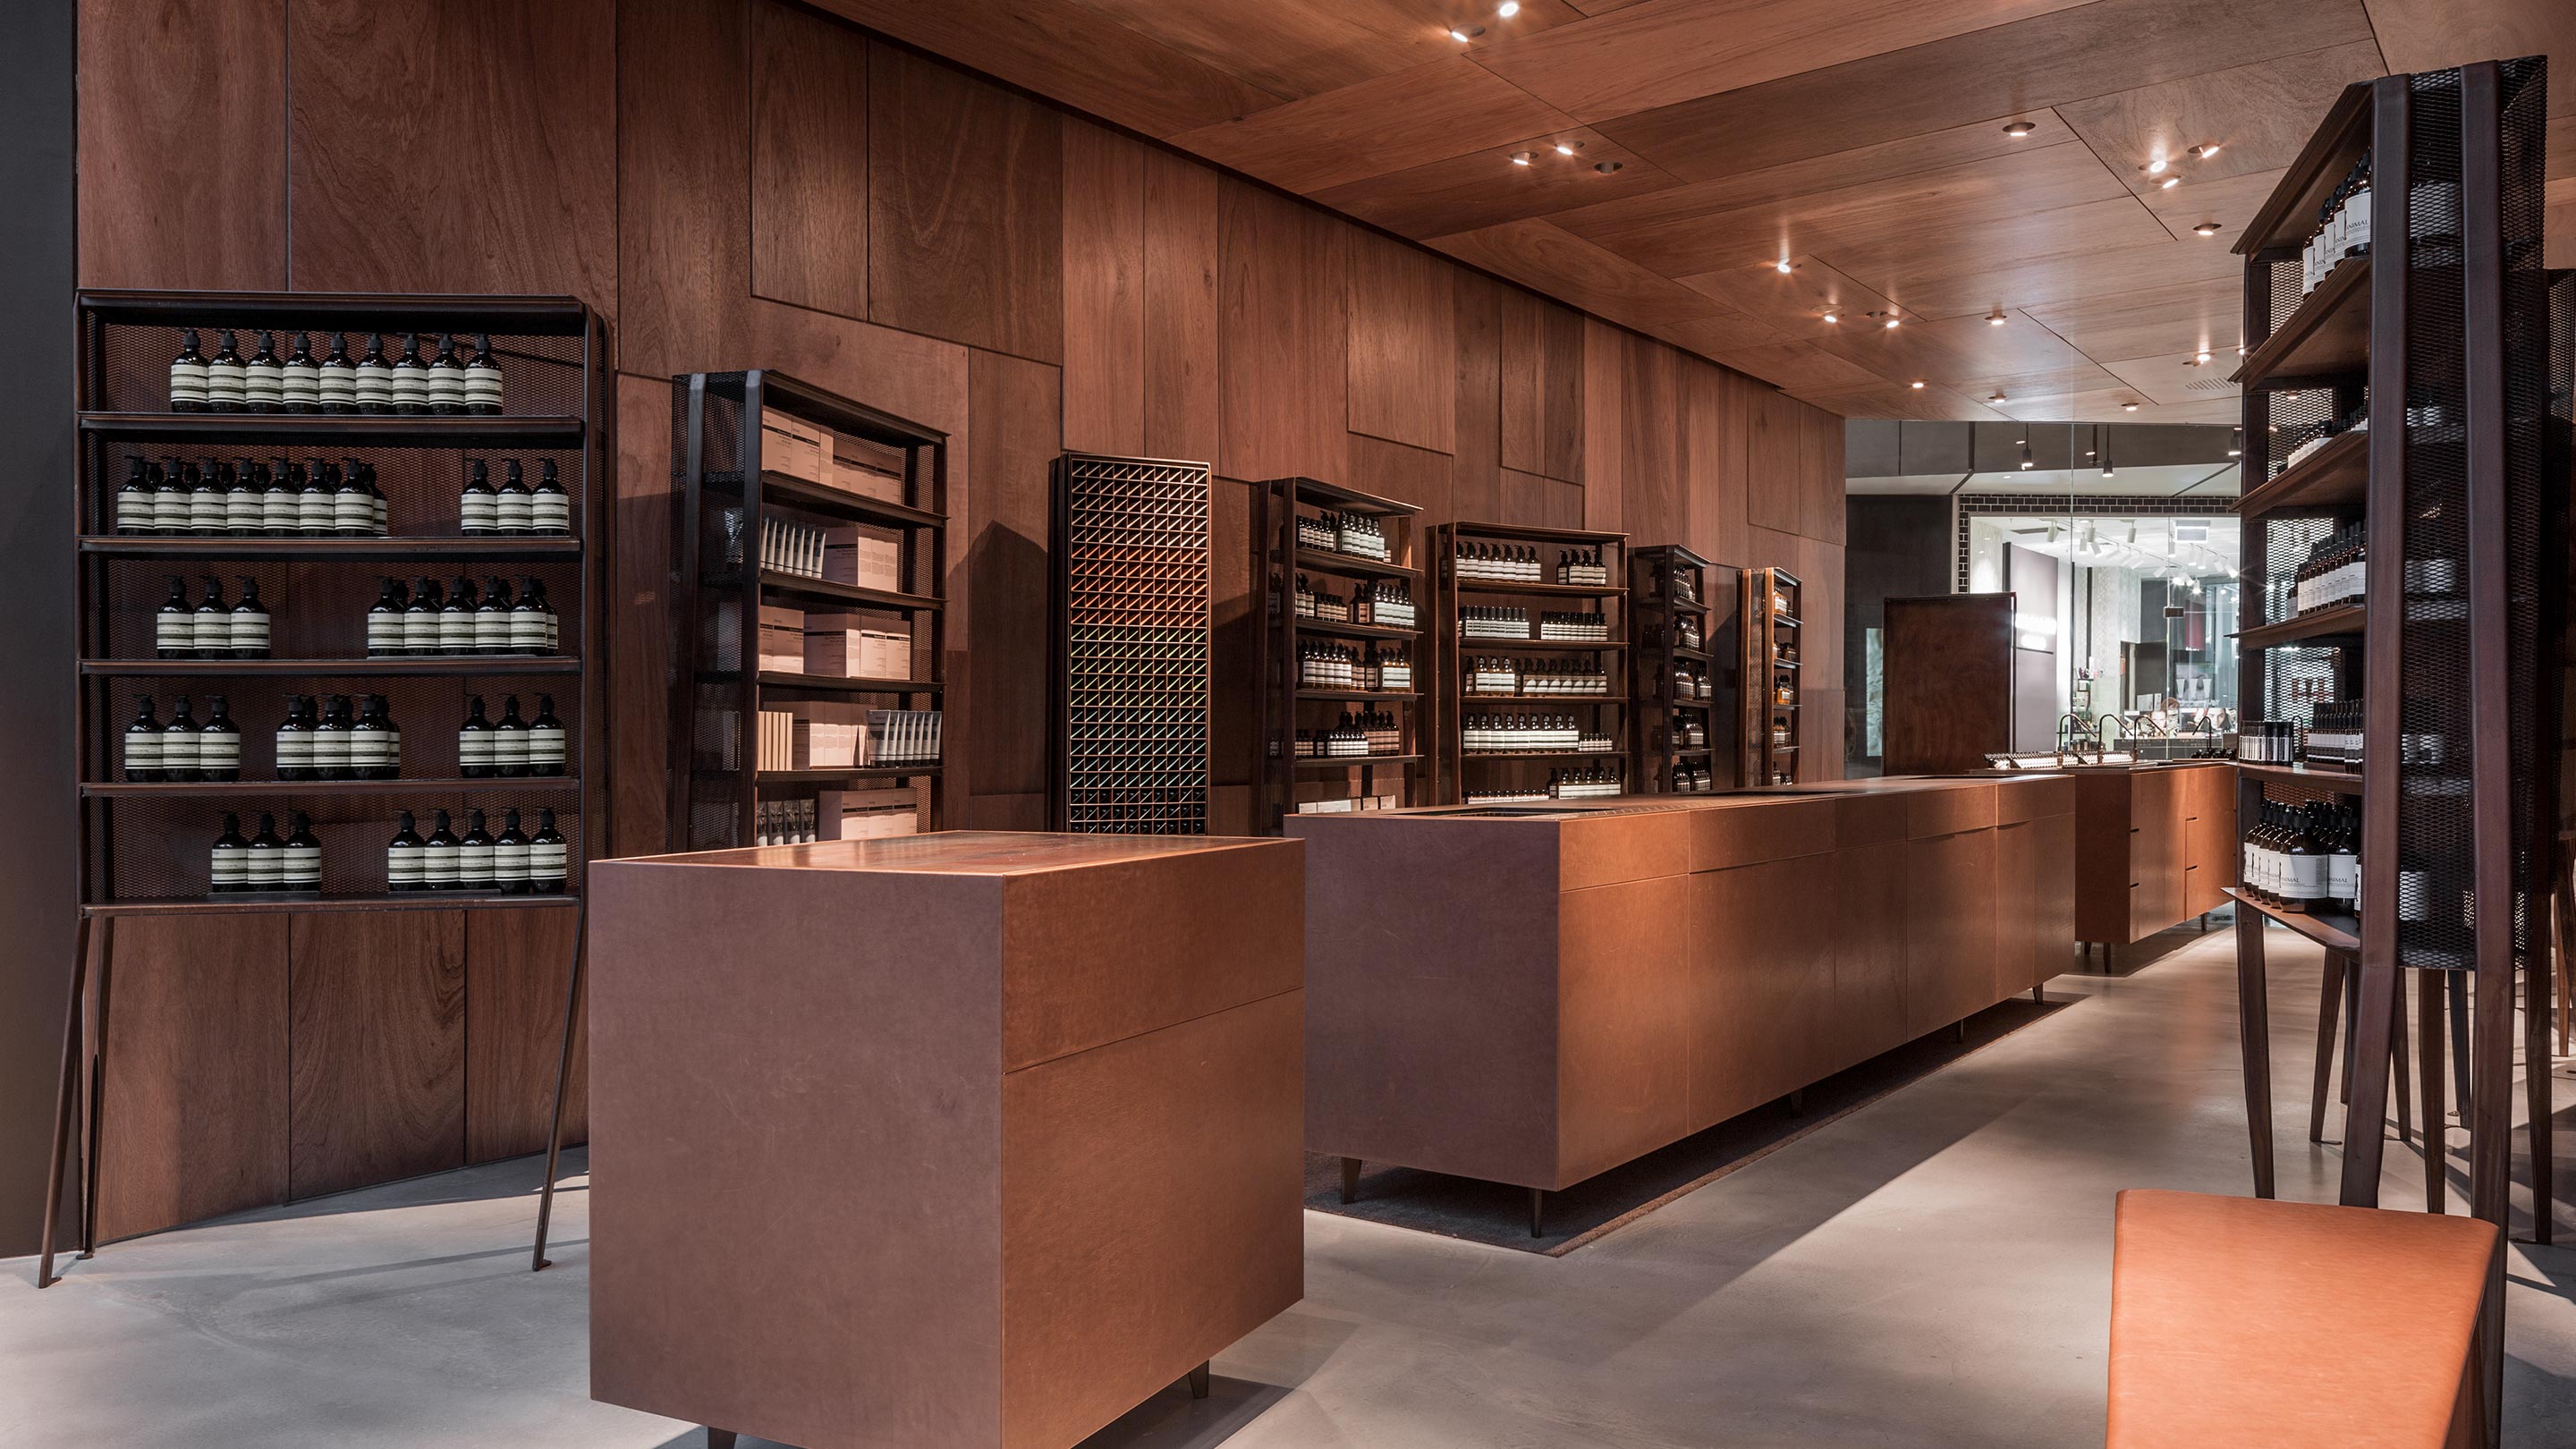 A dim, woody interior with brushed concrete flooring. Wooden counters line the timber walls of the store.